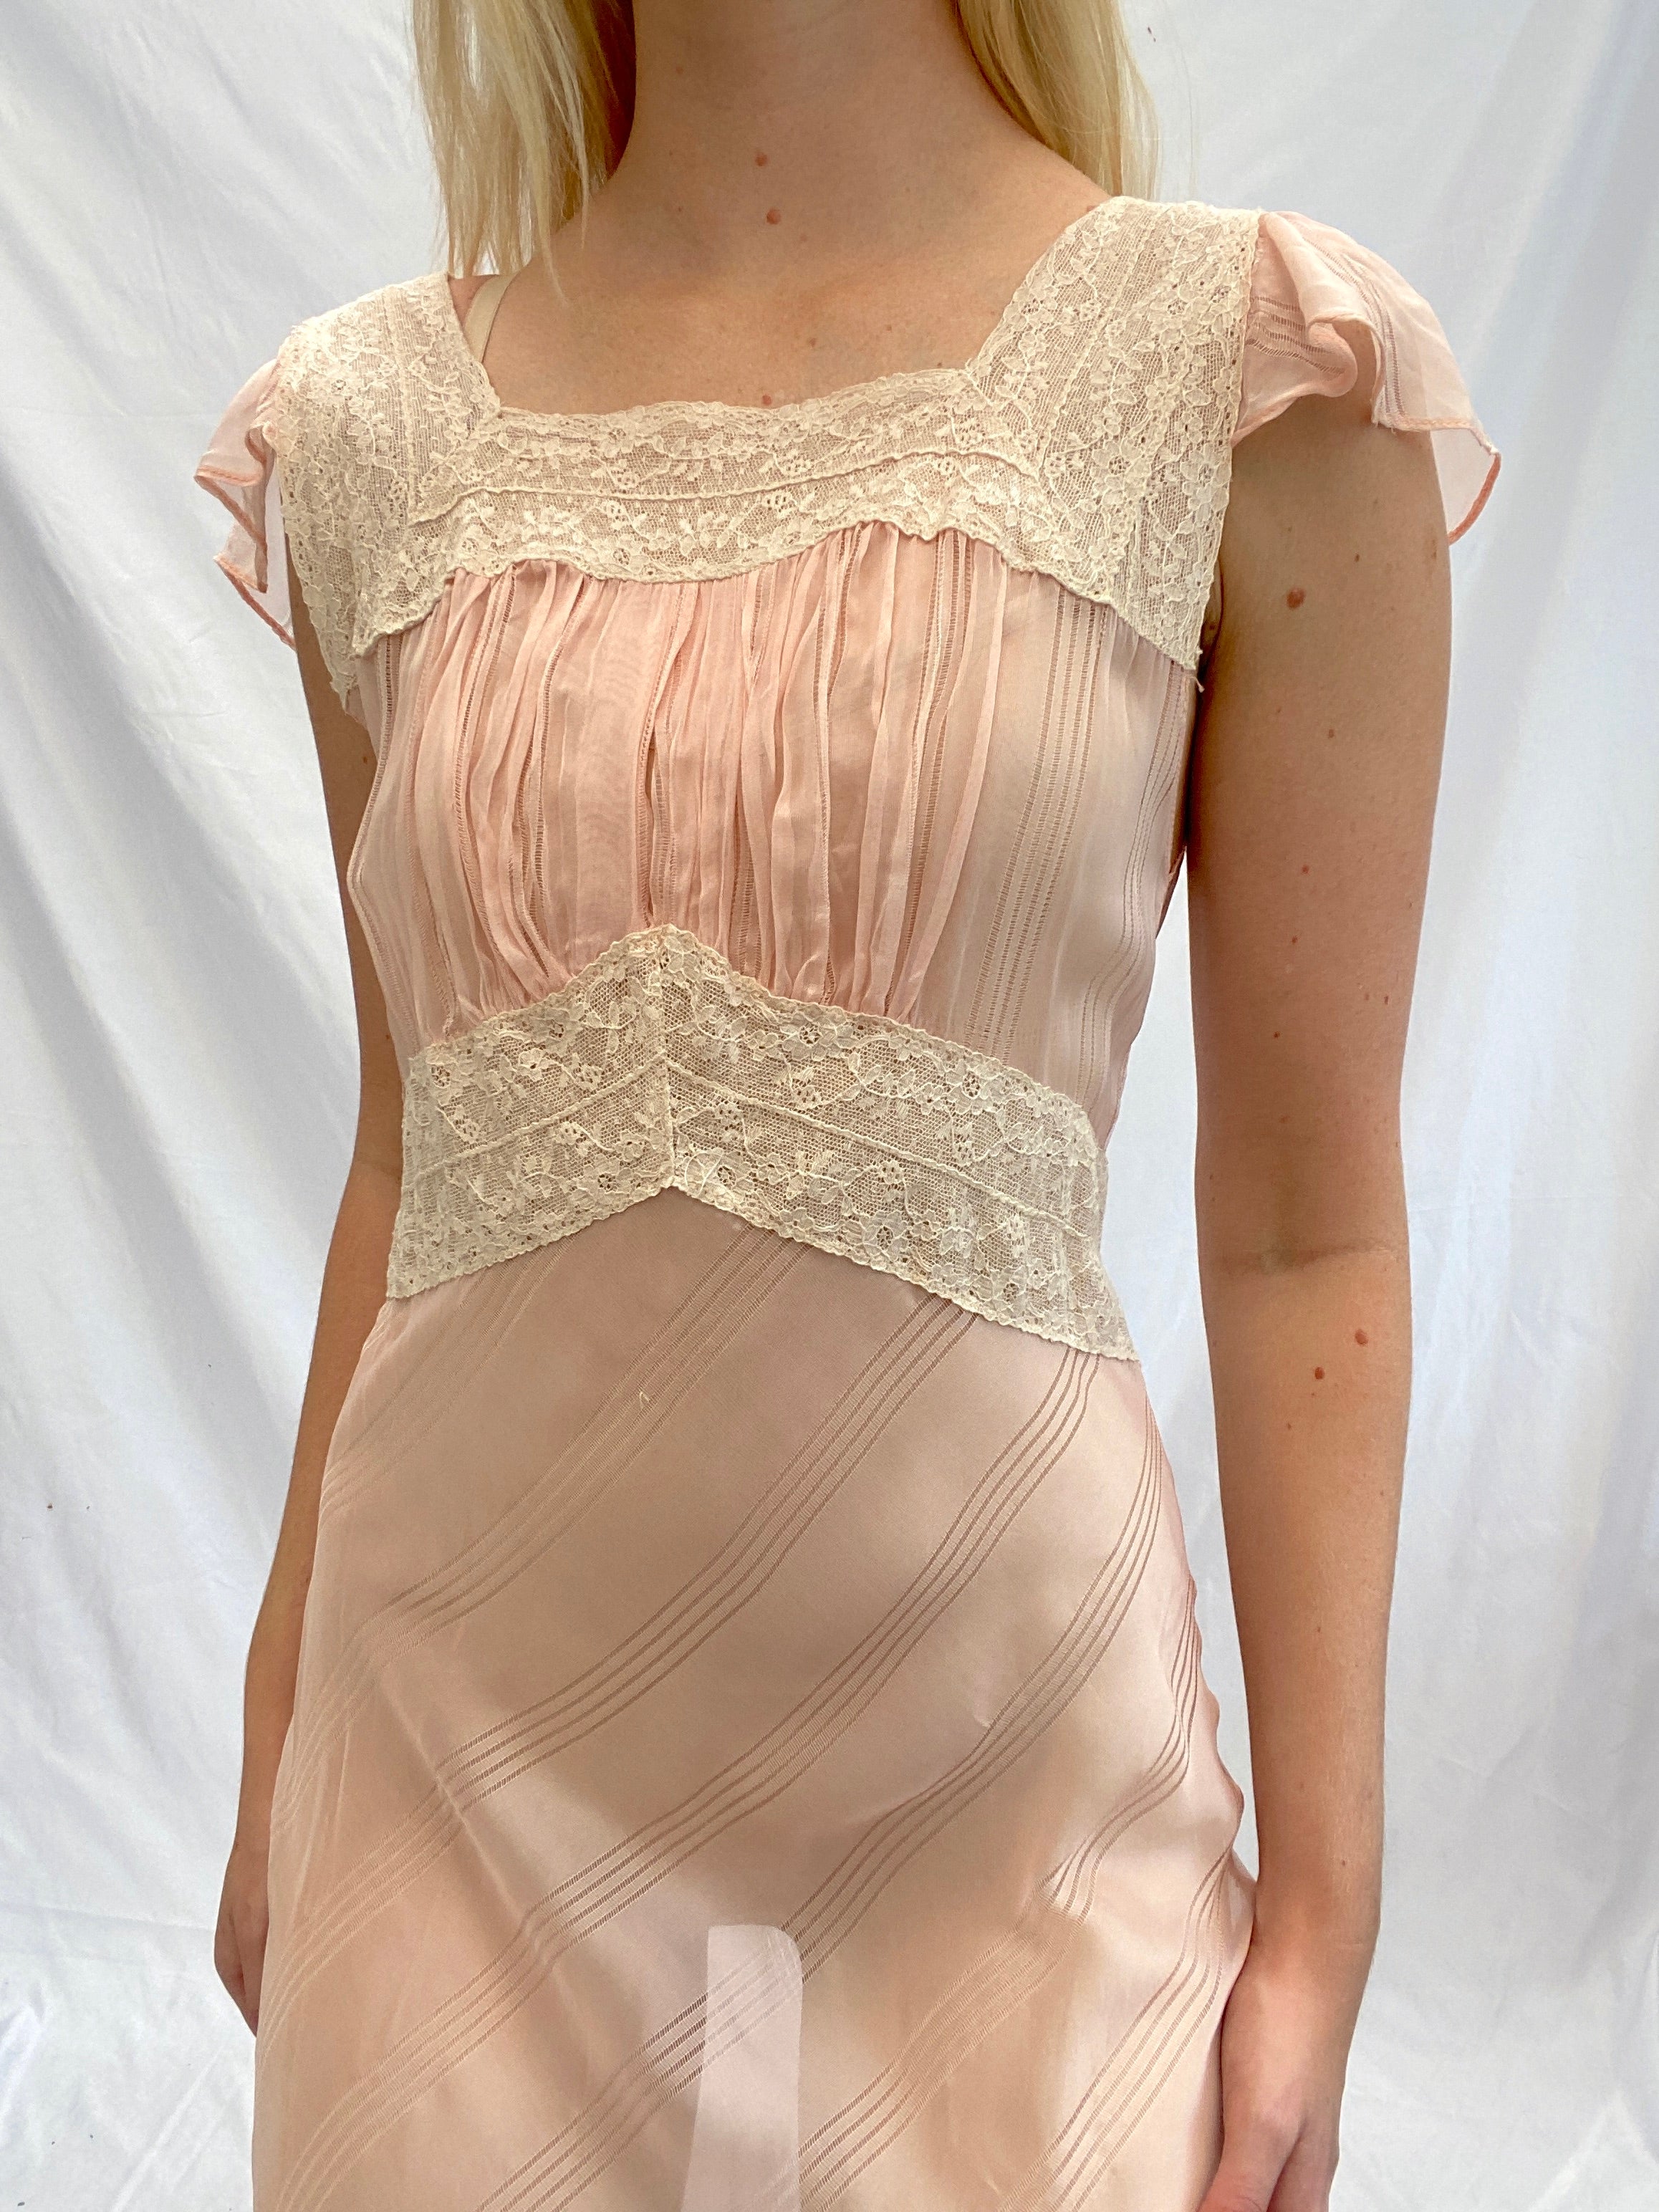 Pink Slip with Twirl Stripe Pattern and Cream Lace